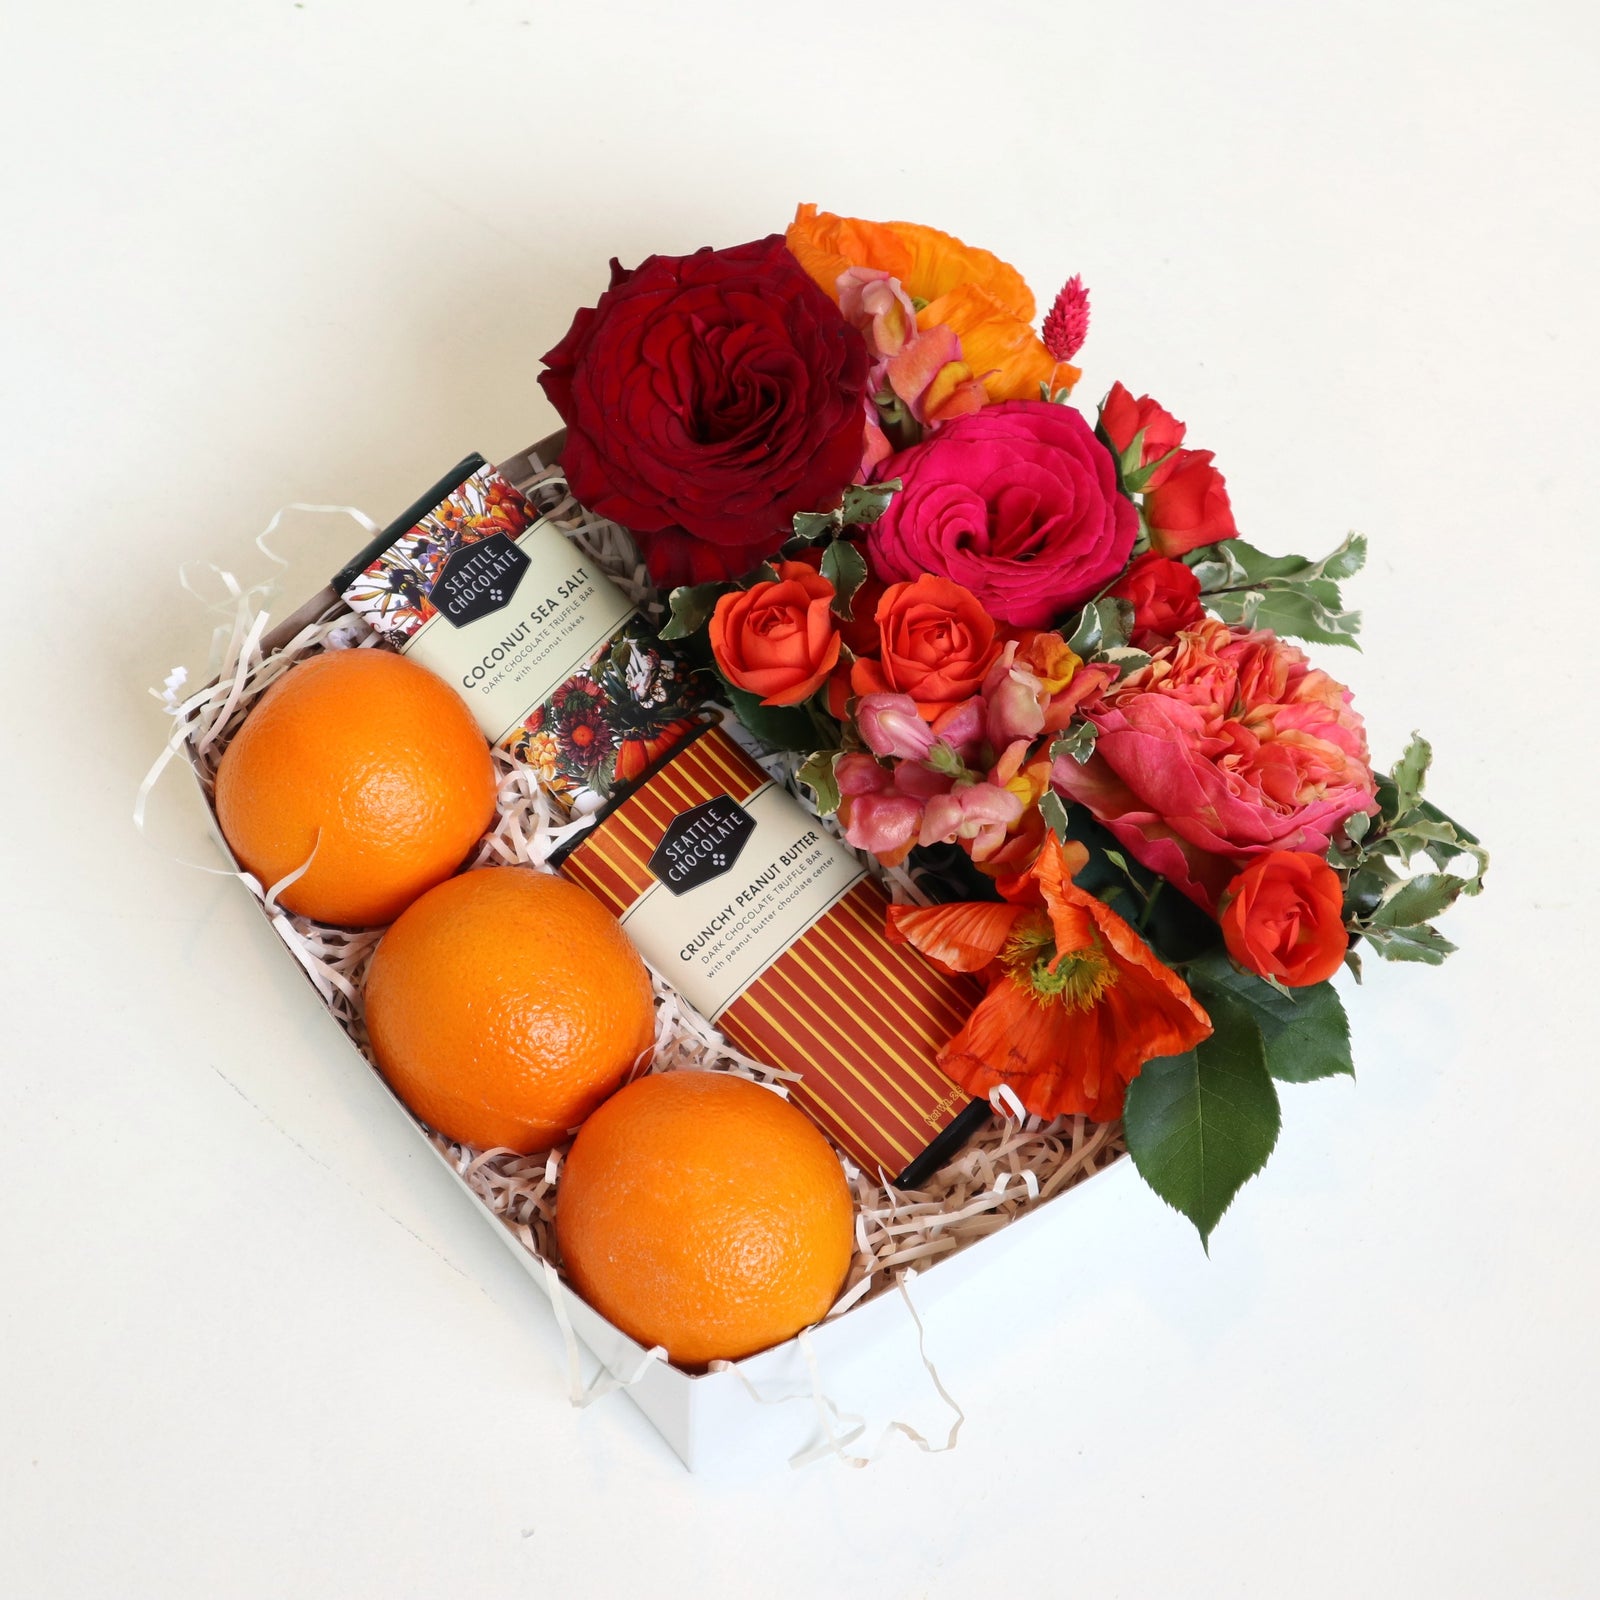 Gift box with two Seattle chocolate bars, three oranges, a floral arrangement with red roses, fushia roses, orange spray roses, orange poppies, varigated pitt on a white background. 